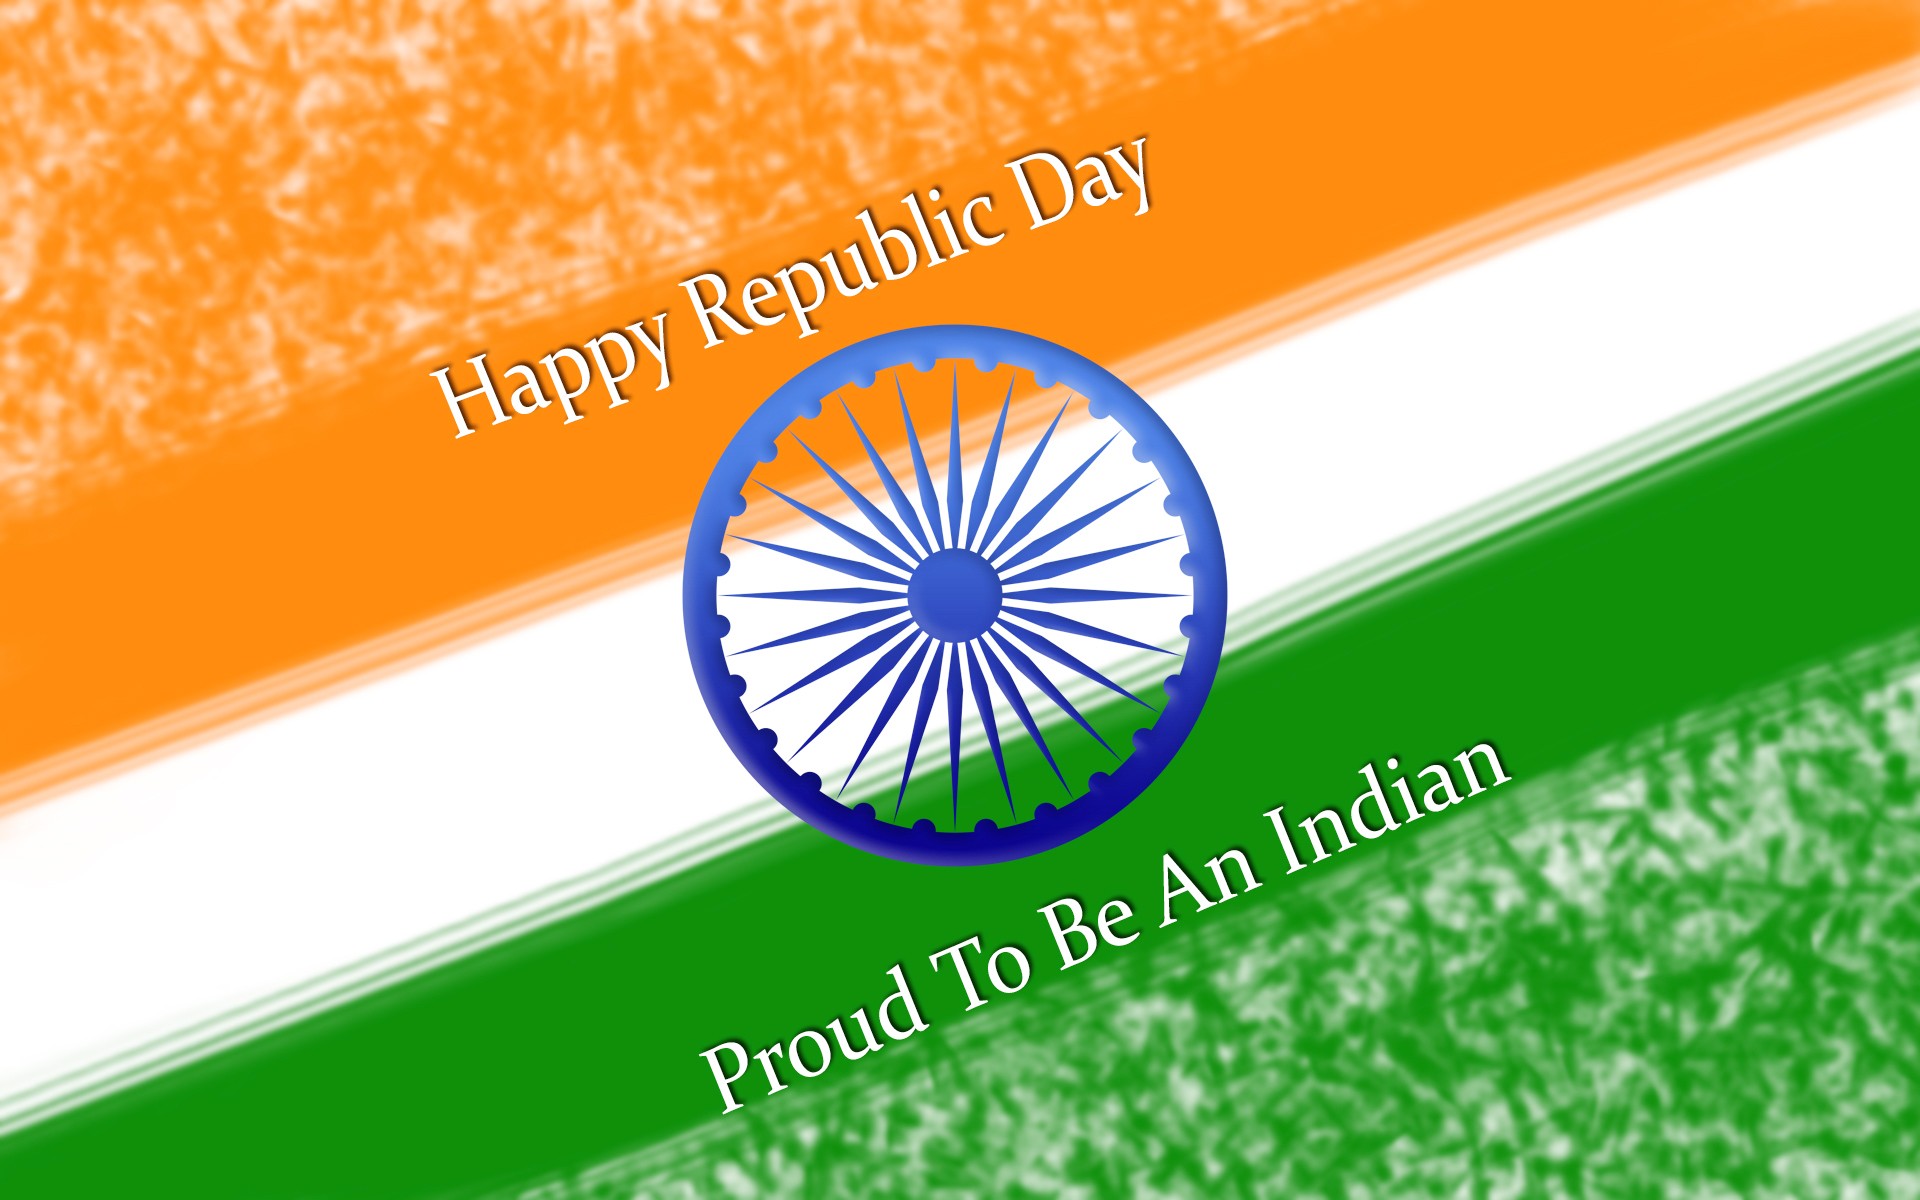 India Republic Day Images For Whatsapp Dp, Profile - Hd Wallpaper Happy Republic Day - HD Wallpaper 